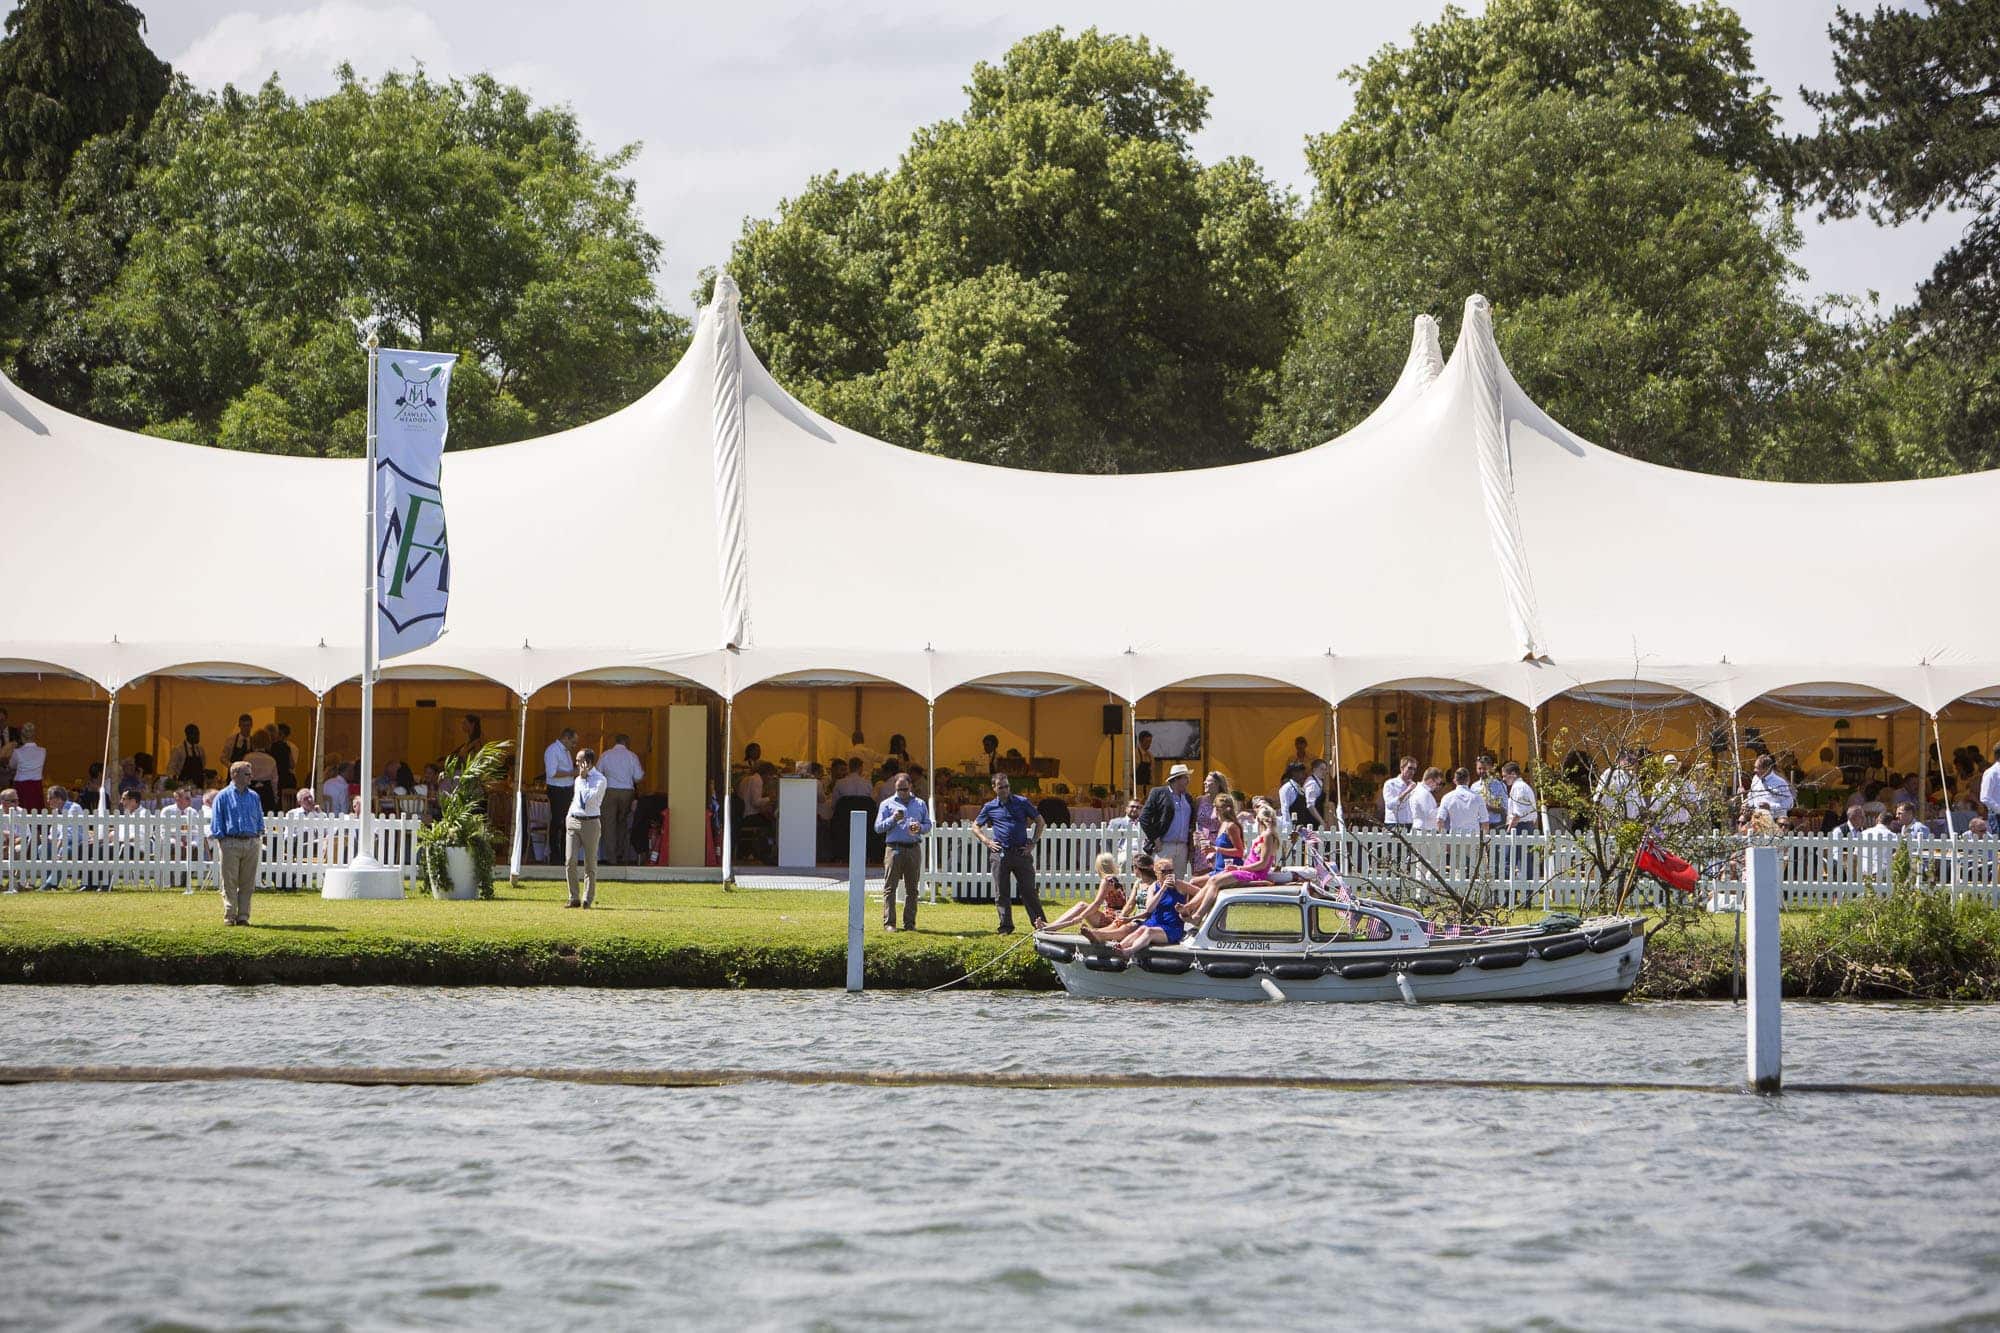 River boat on Thames infront of marquee